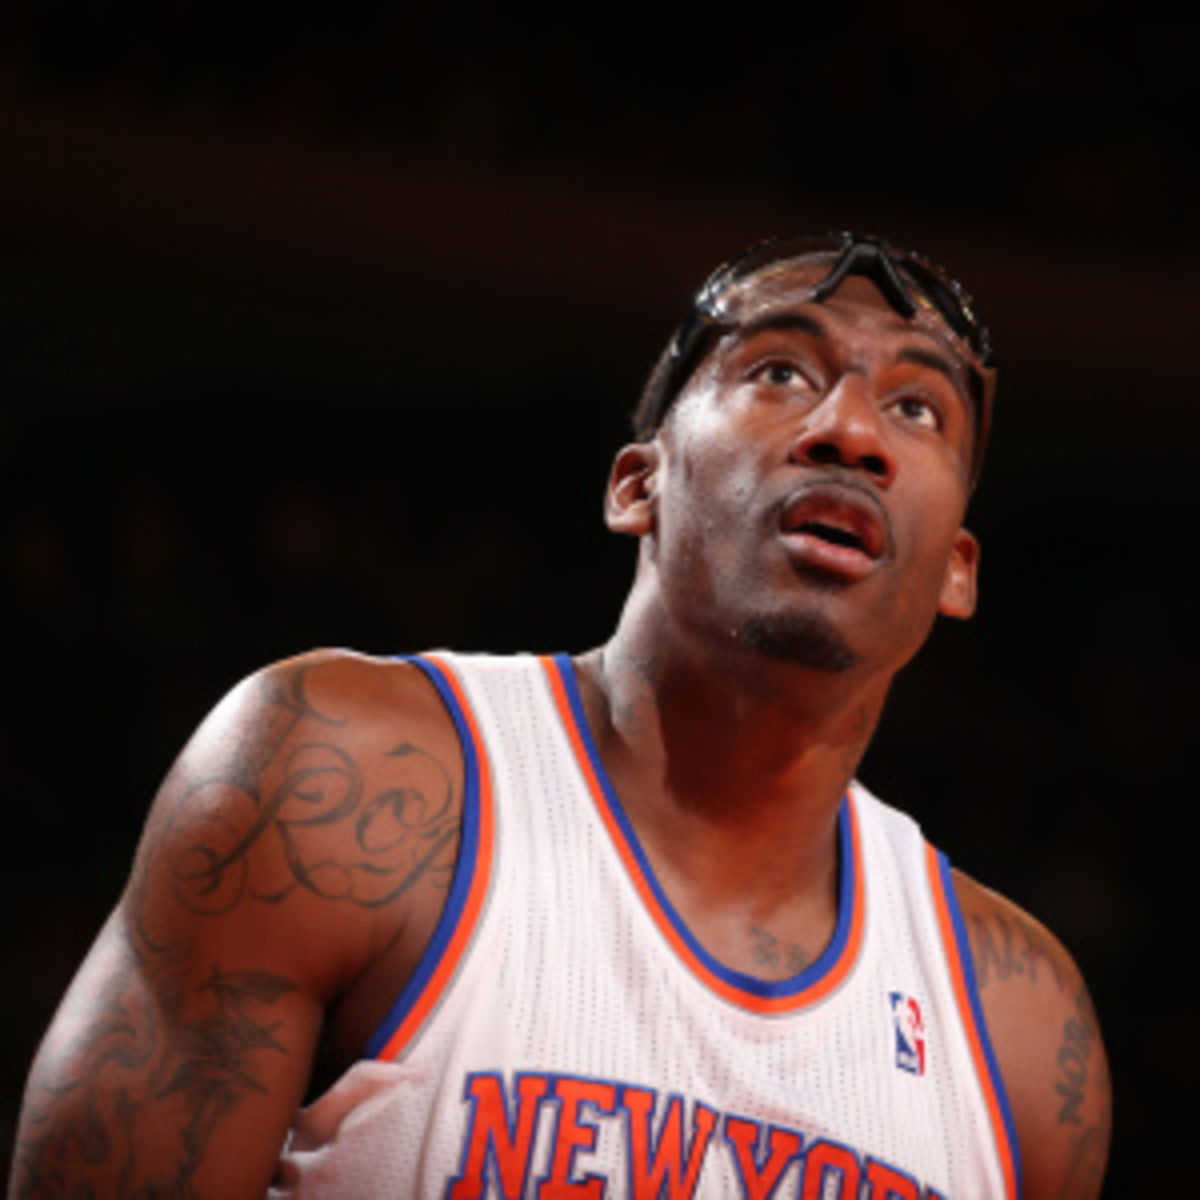 Amar'e Stoudemire will coach the Maccabiah Games this summer. (Nathaniel S. Butler/Getty Images)